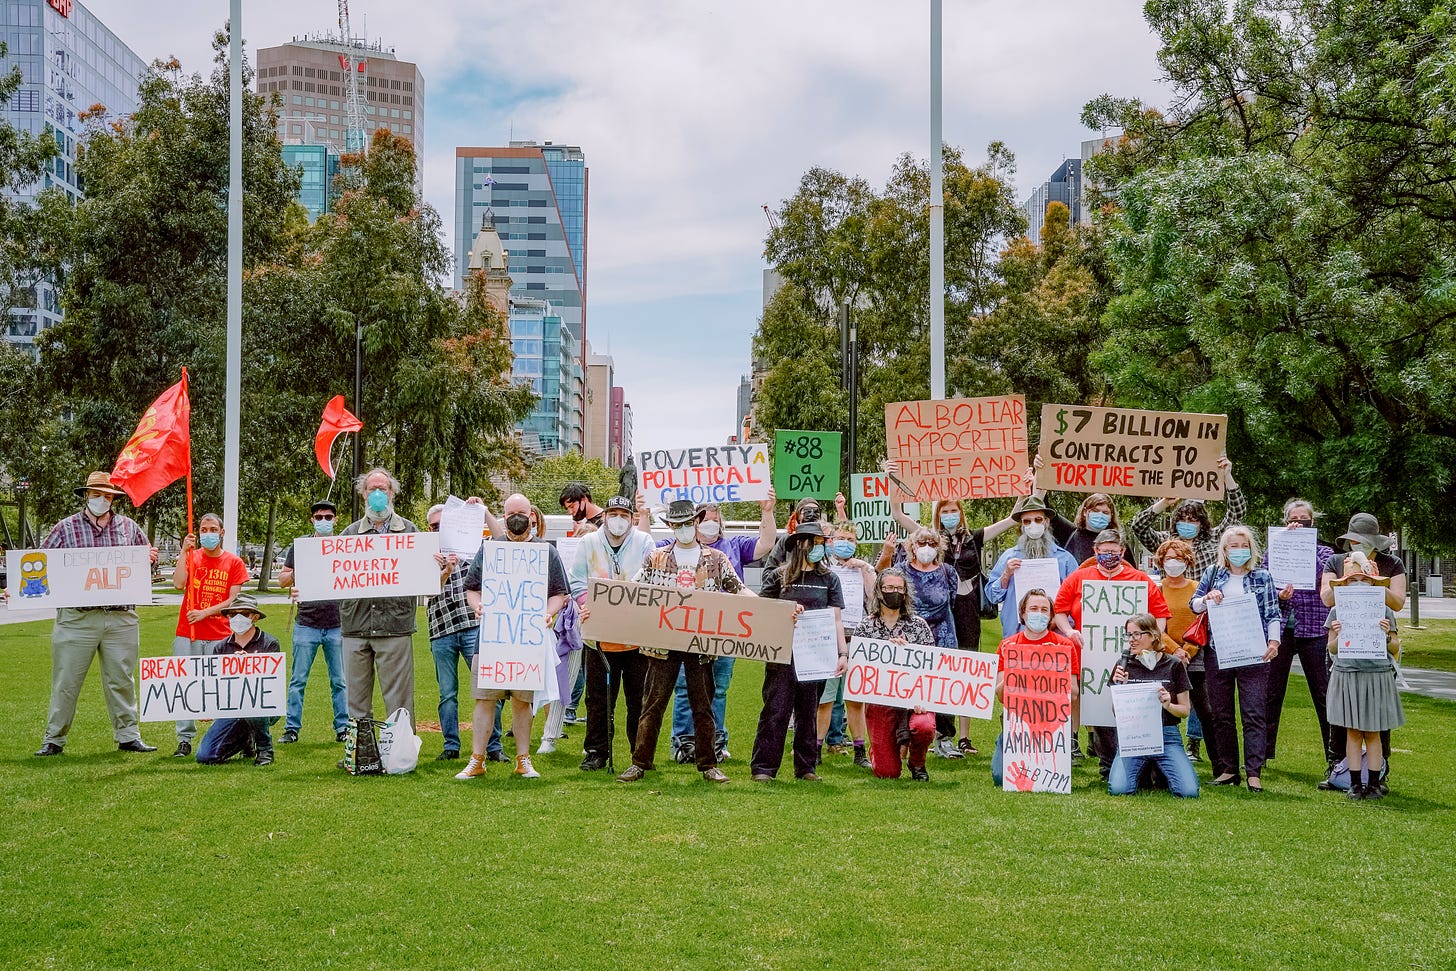 A crowd in a park holding protest signs. 